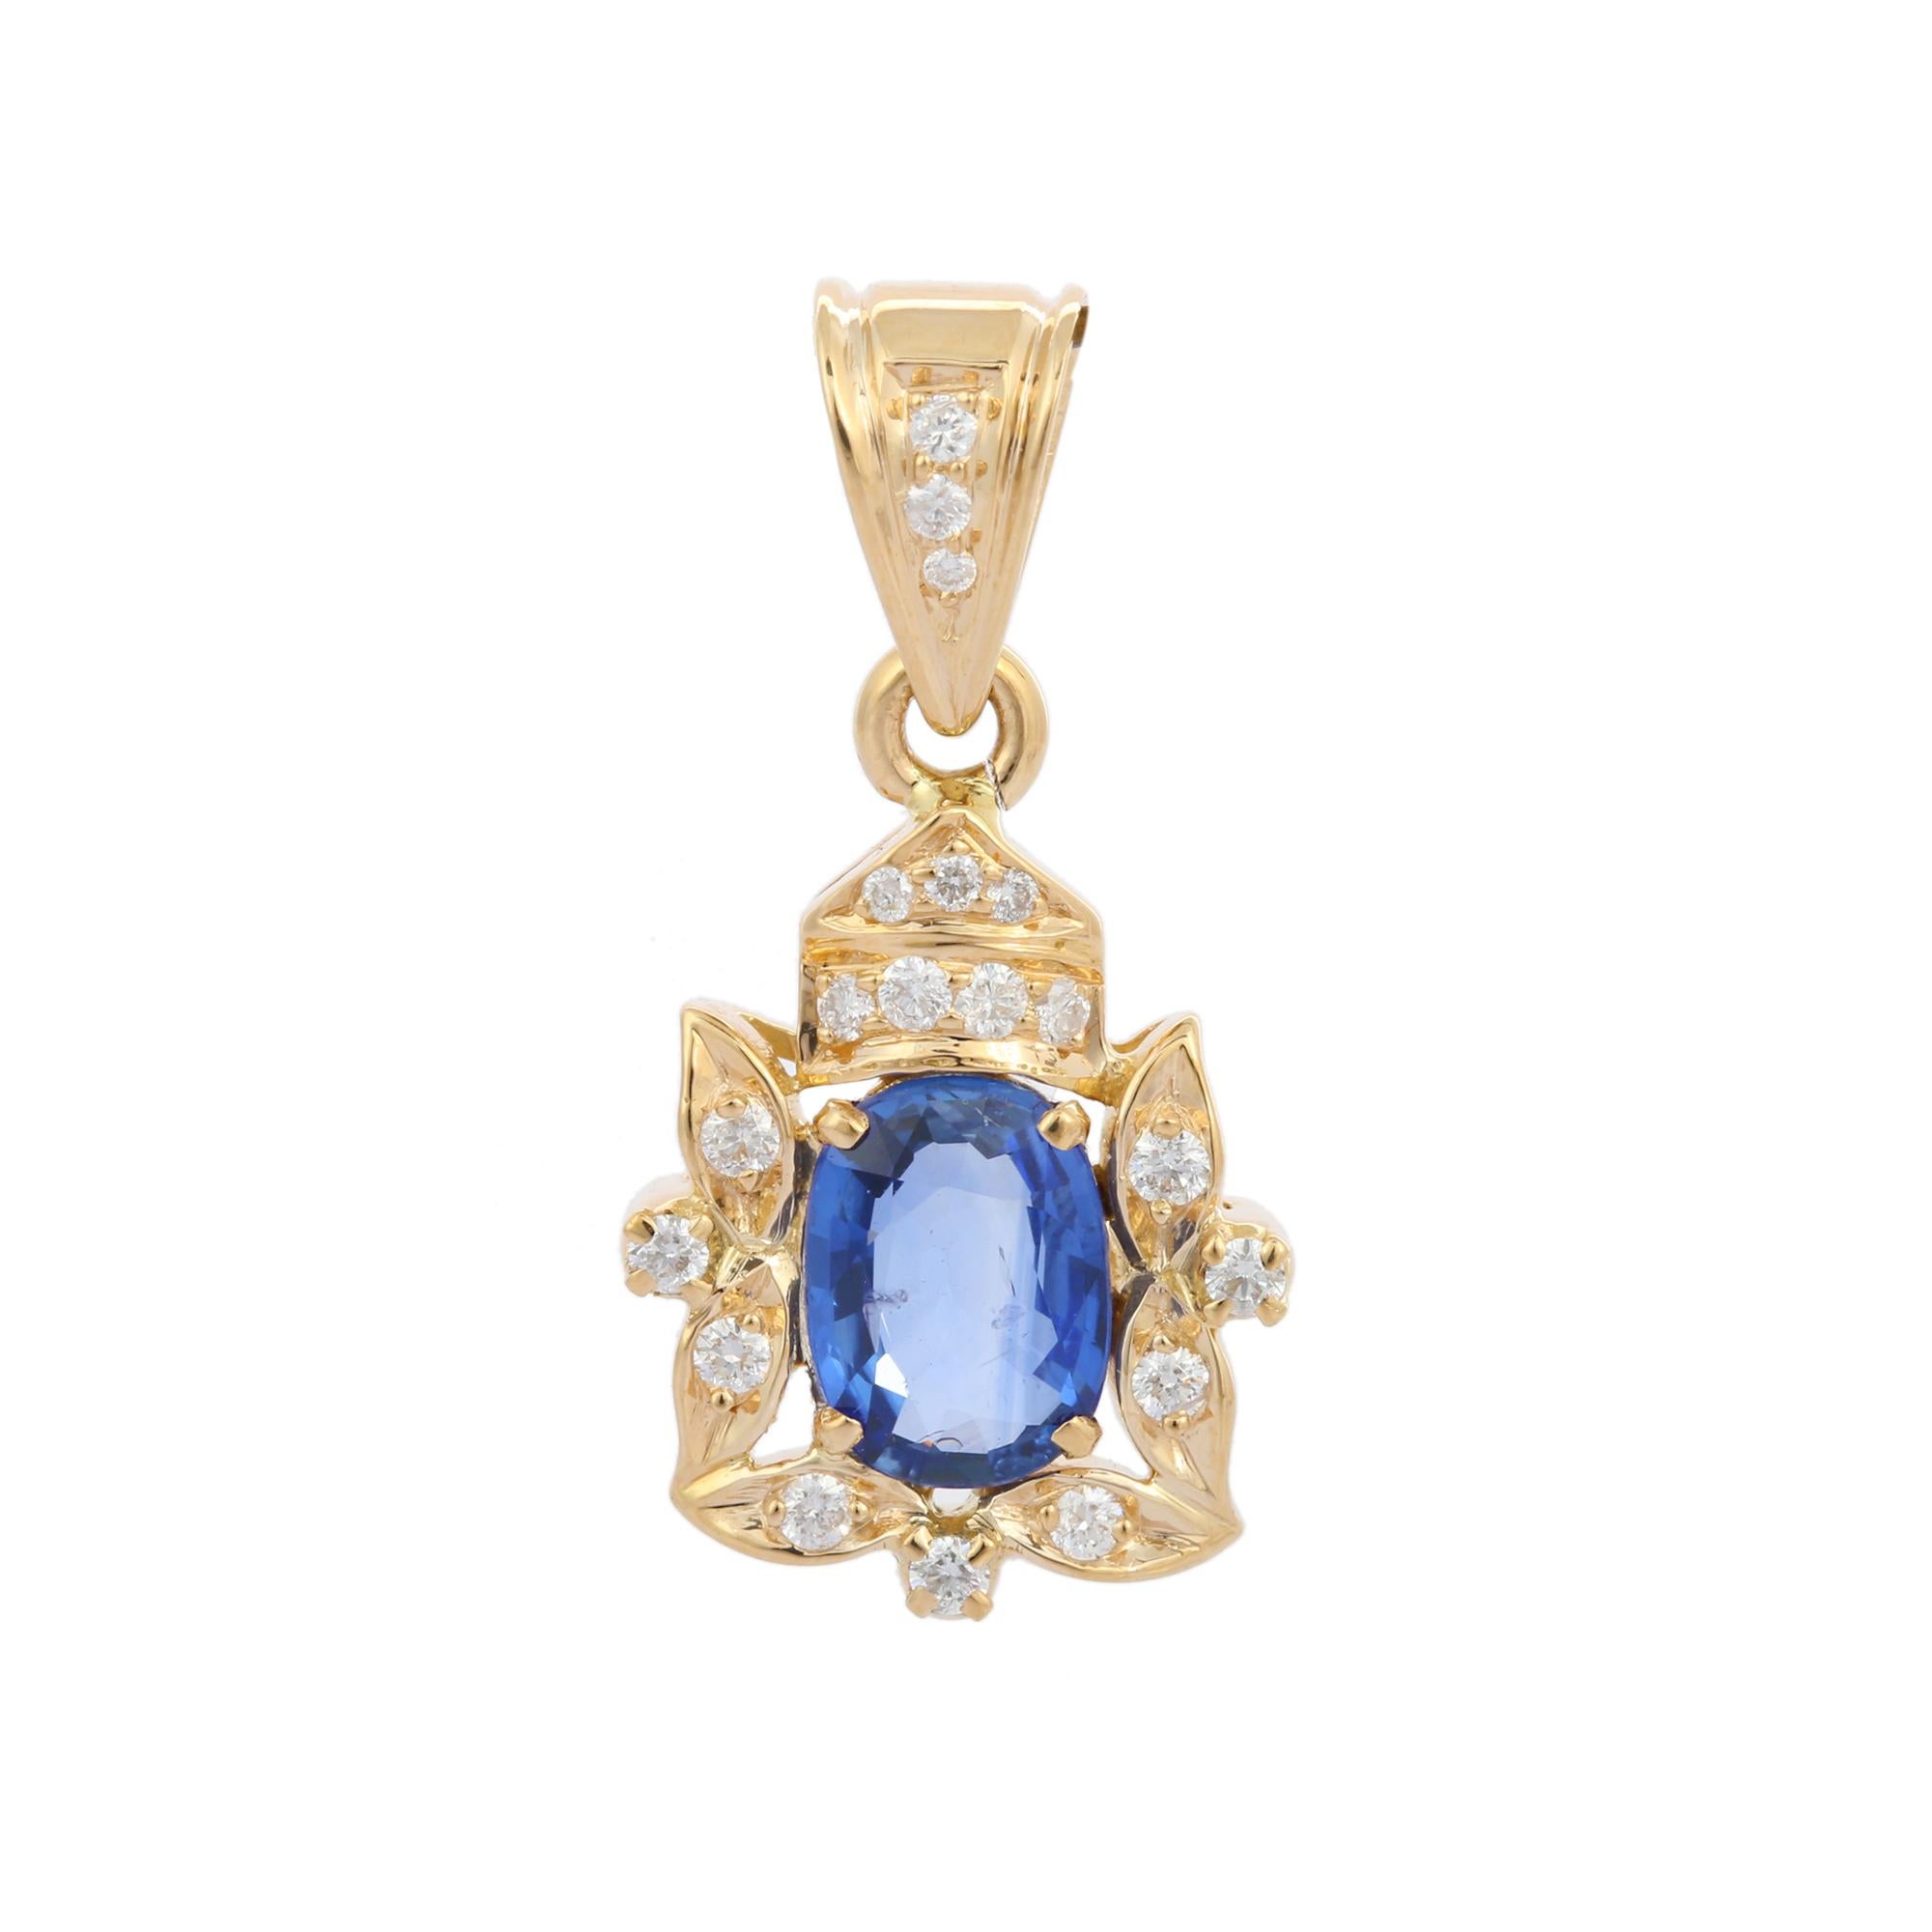 Natural Blue Sapphire pendant in 18K Gold. It has oval cut sapphires with studded diamond that completes your look with a decent touch. Pendants are used to wear or gifted to represent love and promises. It's an attractive jewelry piece that goes